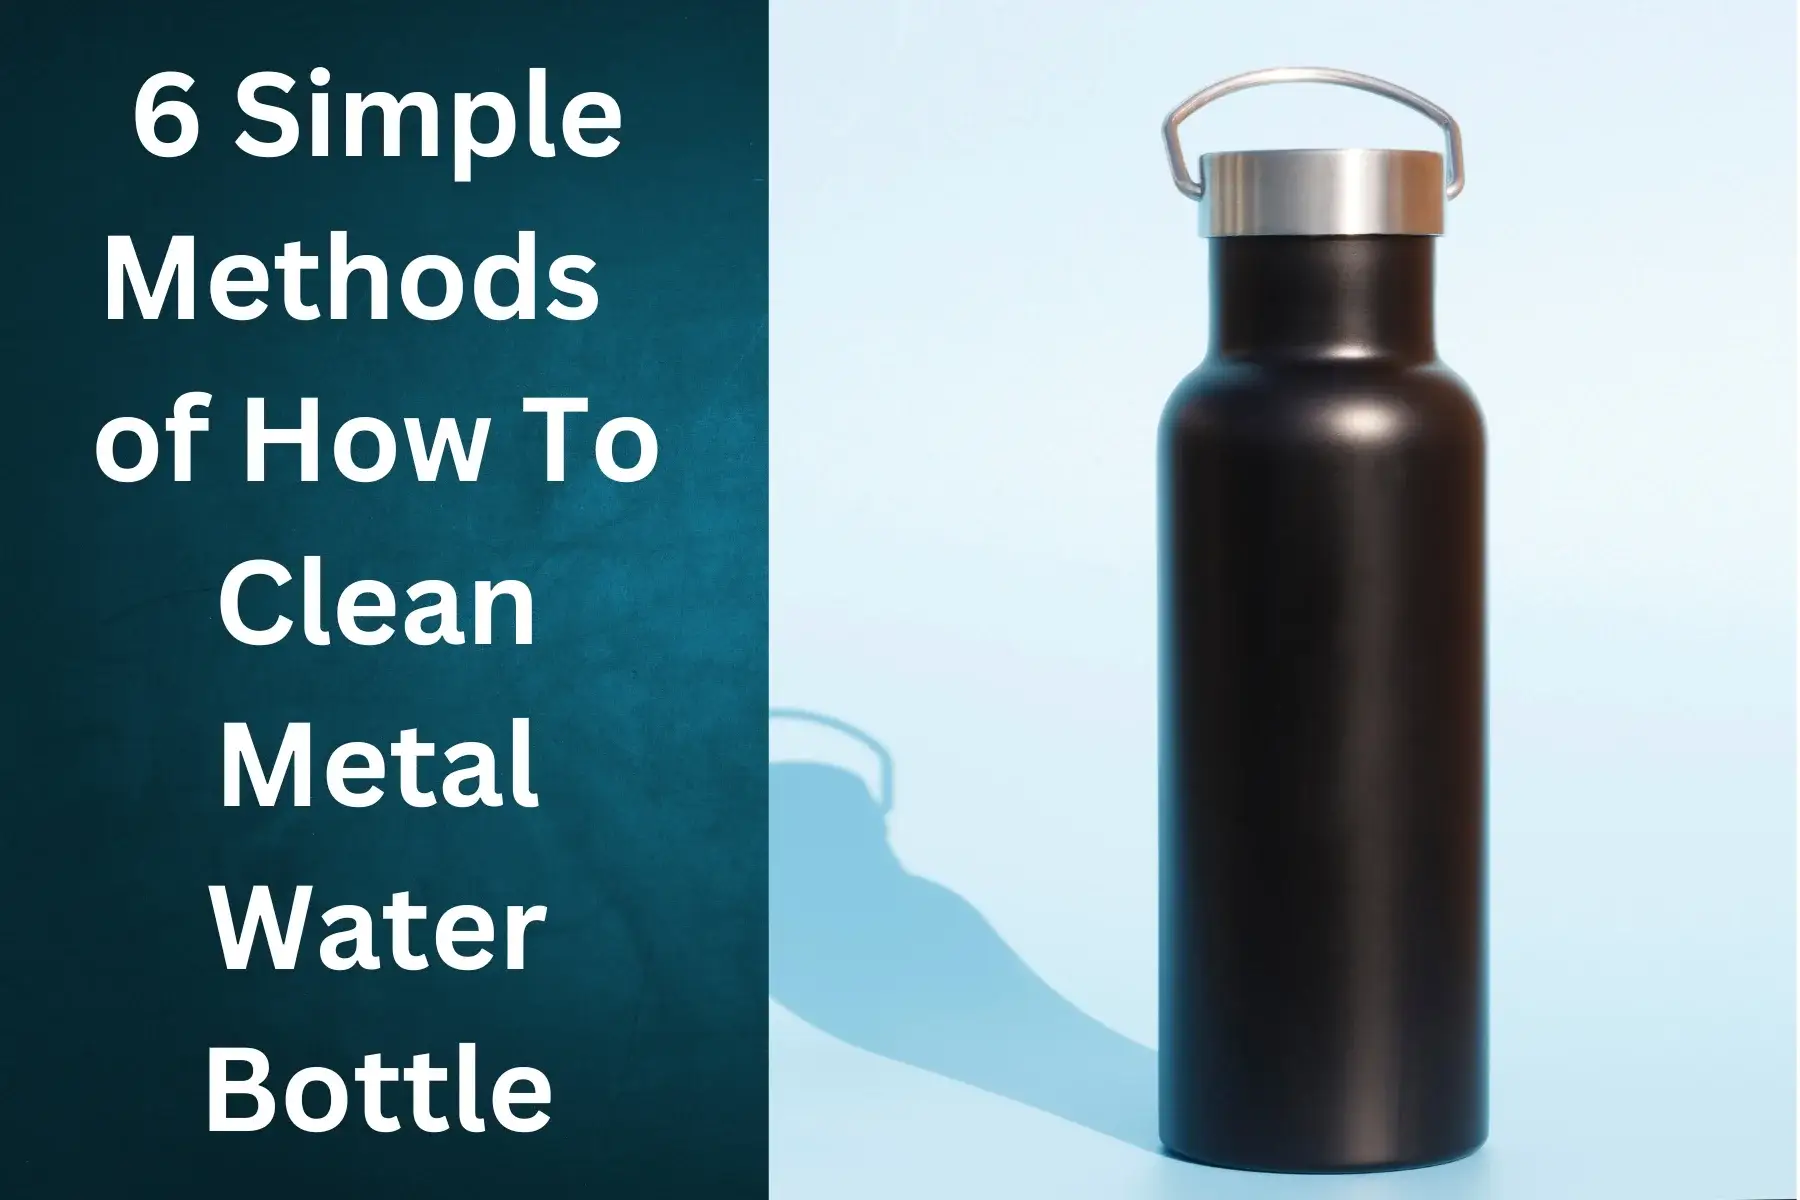 How To Clean Metal Water Bottle?